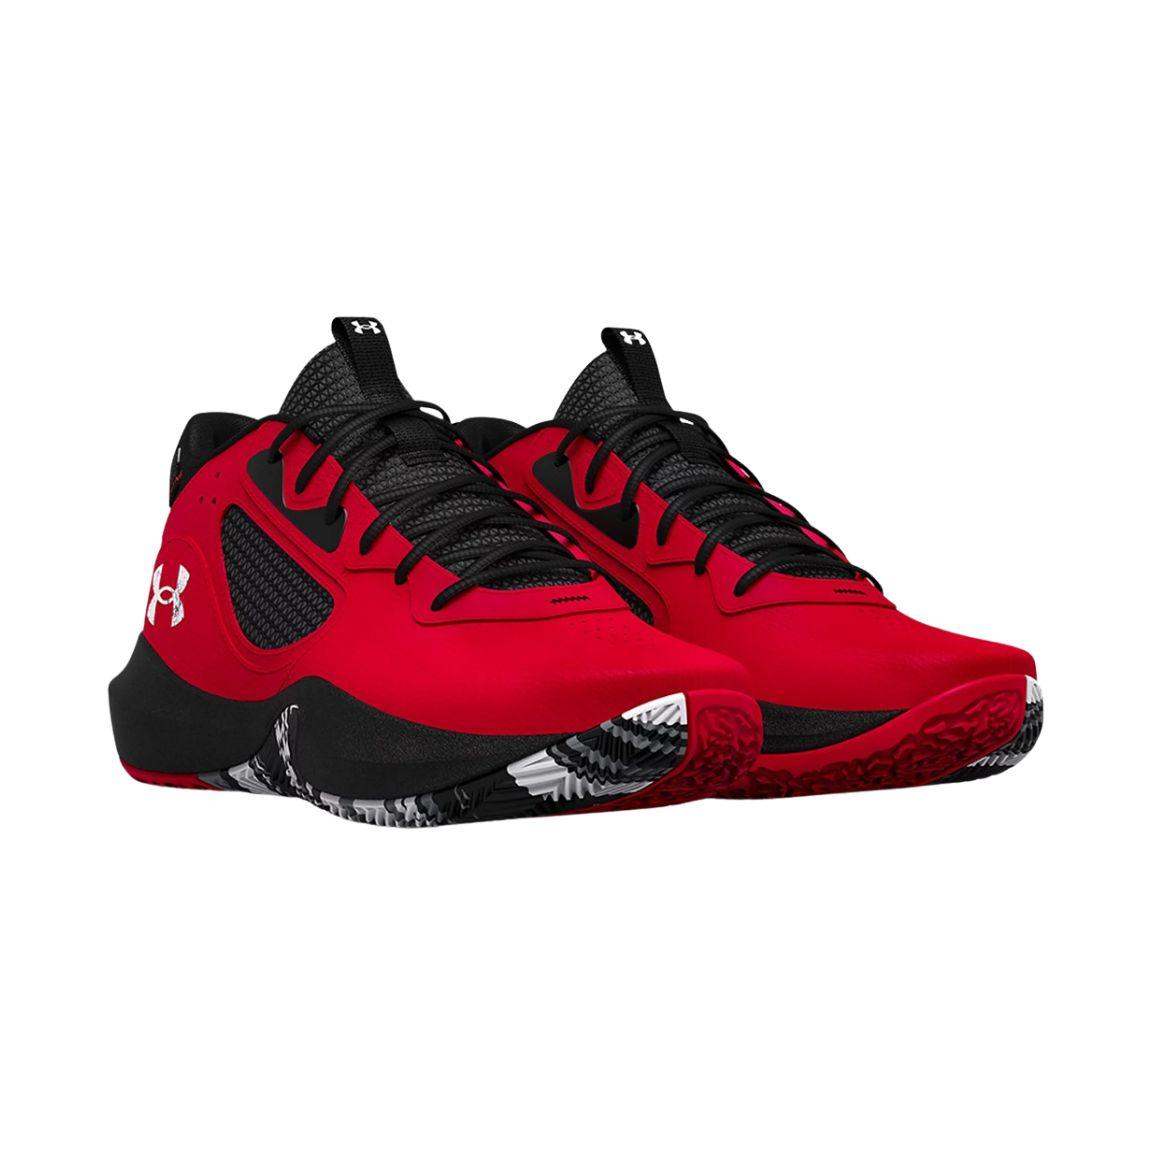 Unisex Under Armour Lockdown 6 Basketball Shoes - Sports Excellence